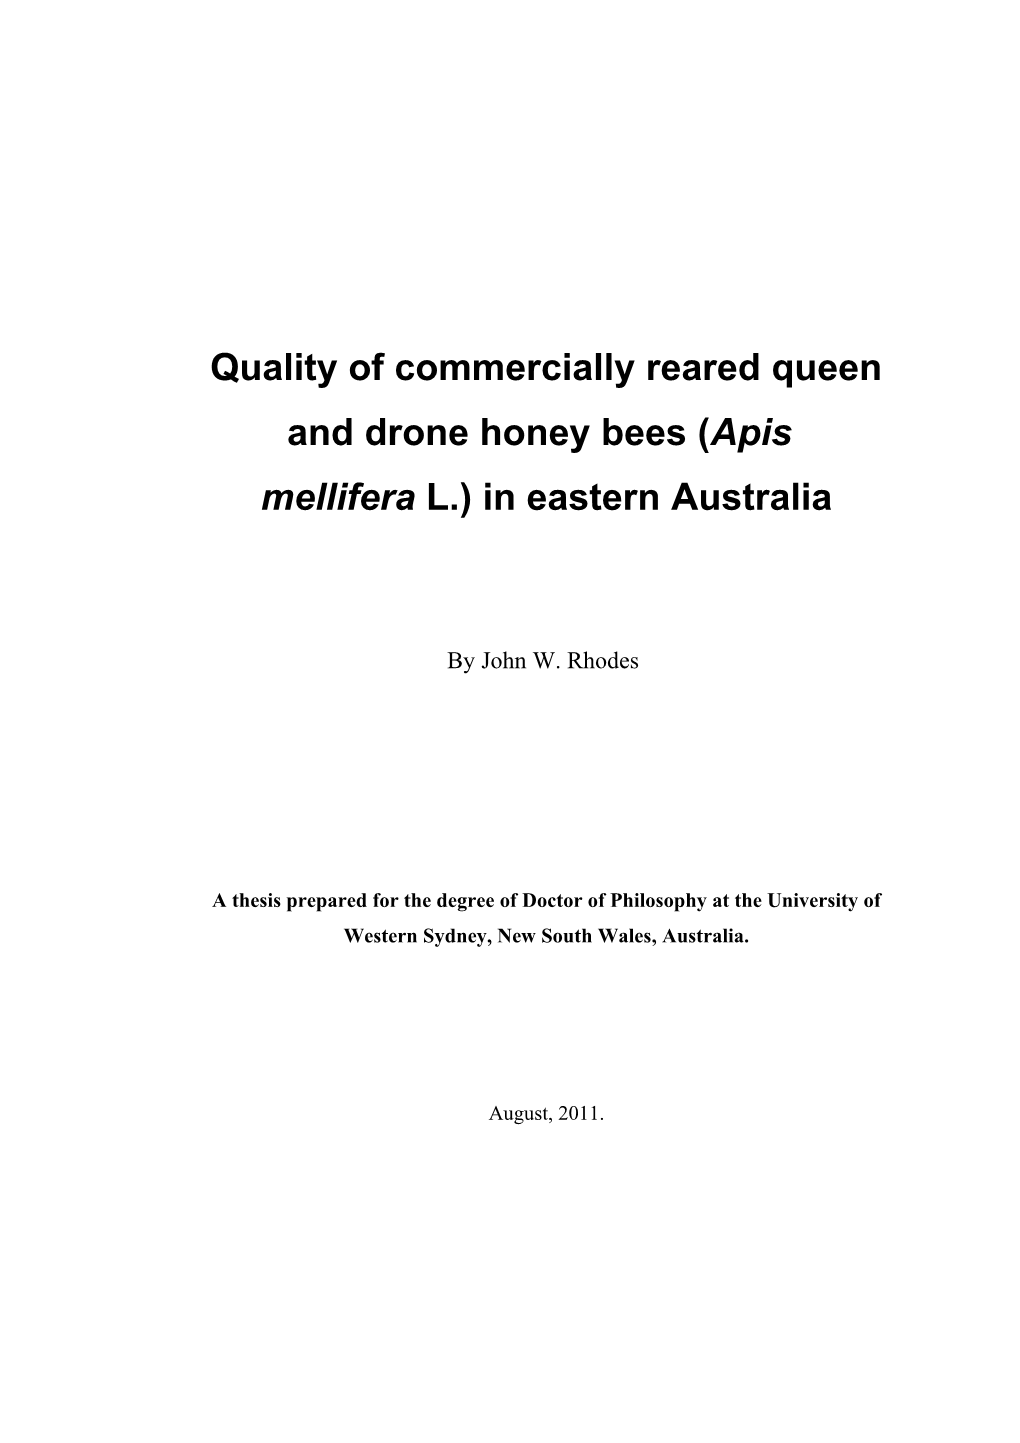 Quality of Commercially Reared Queen and Drone Honey Bees (Apis Mellifera L.) in Eastern Australia